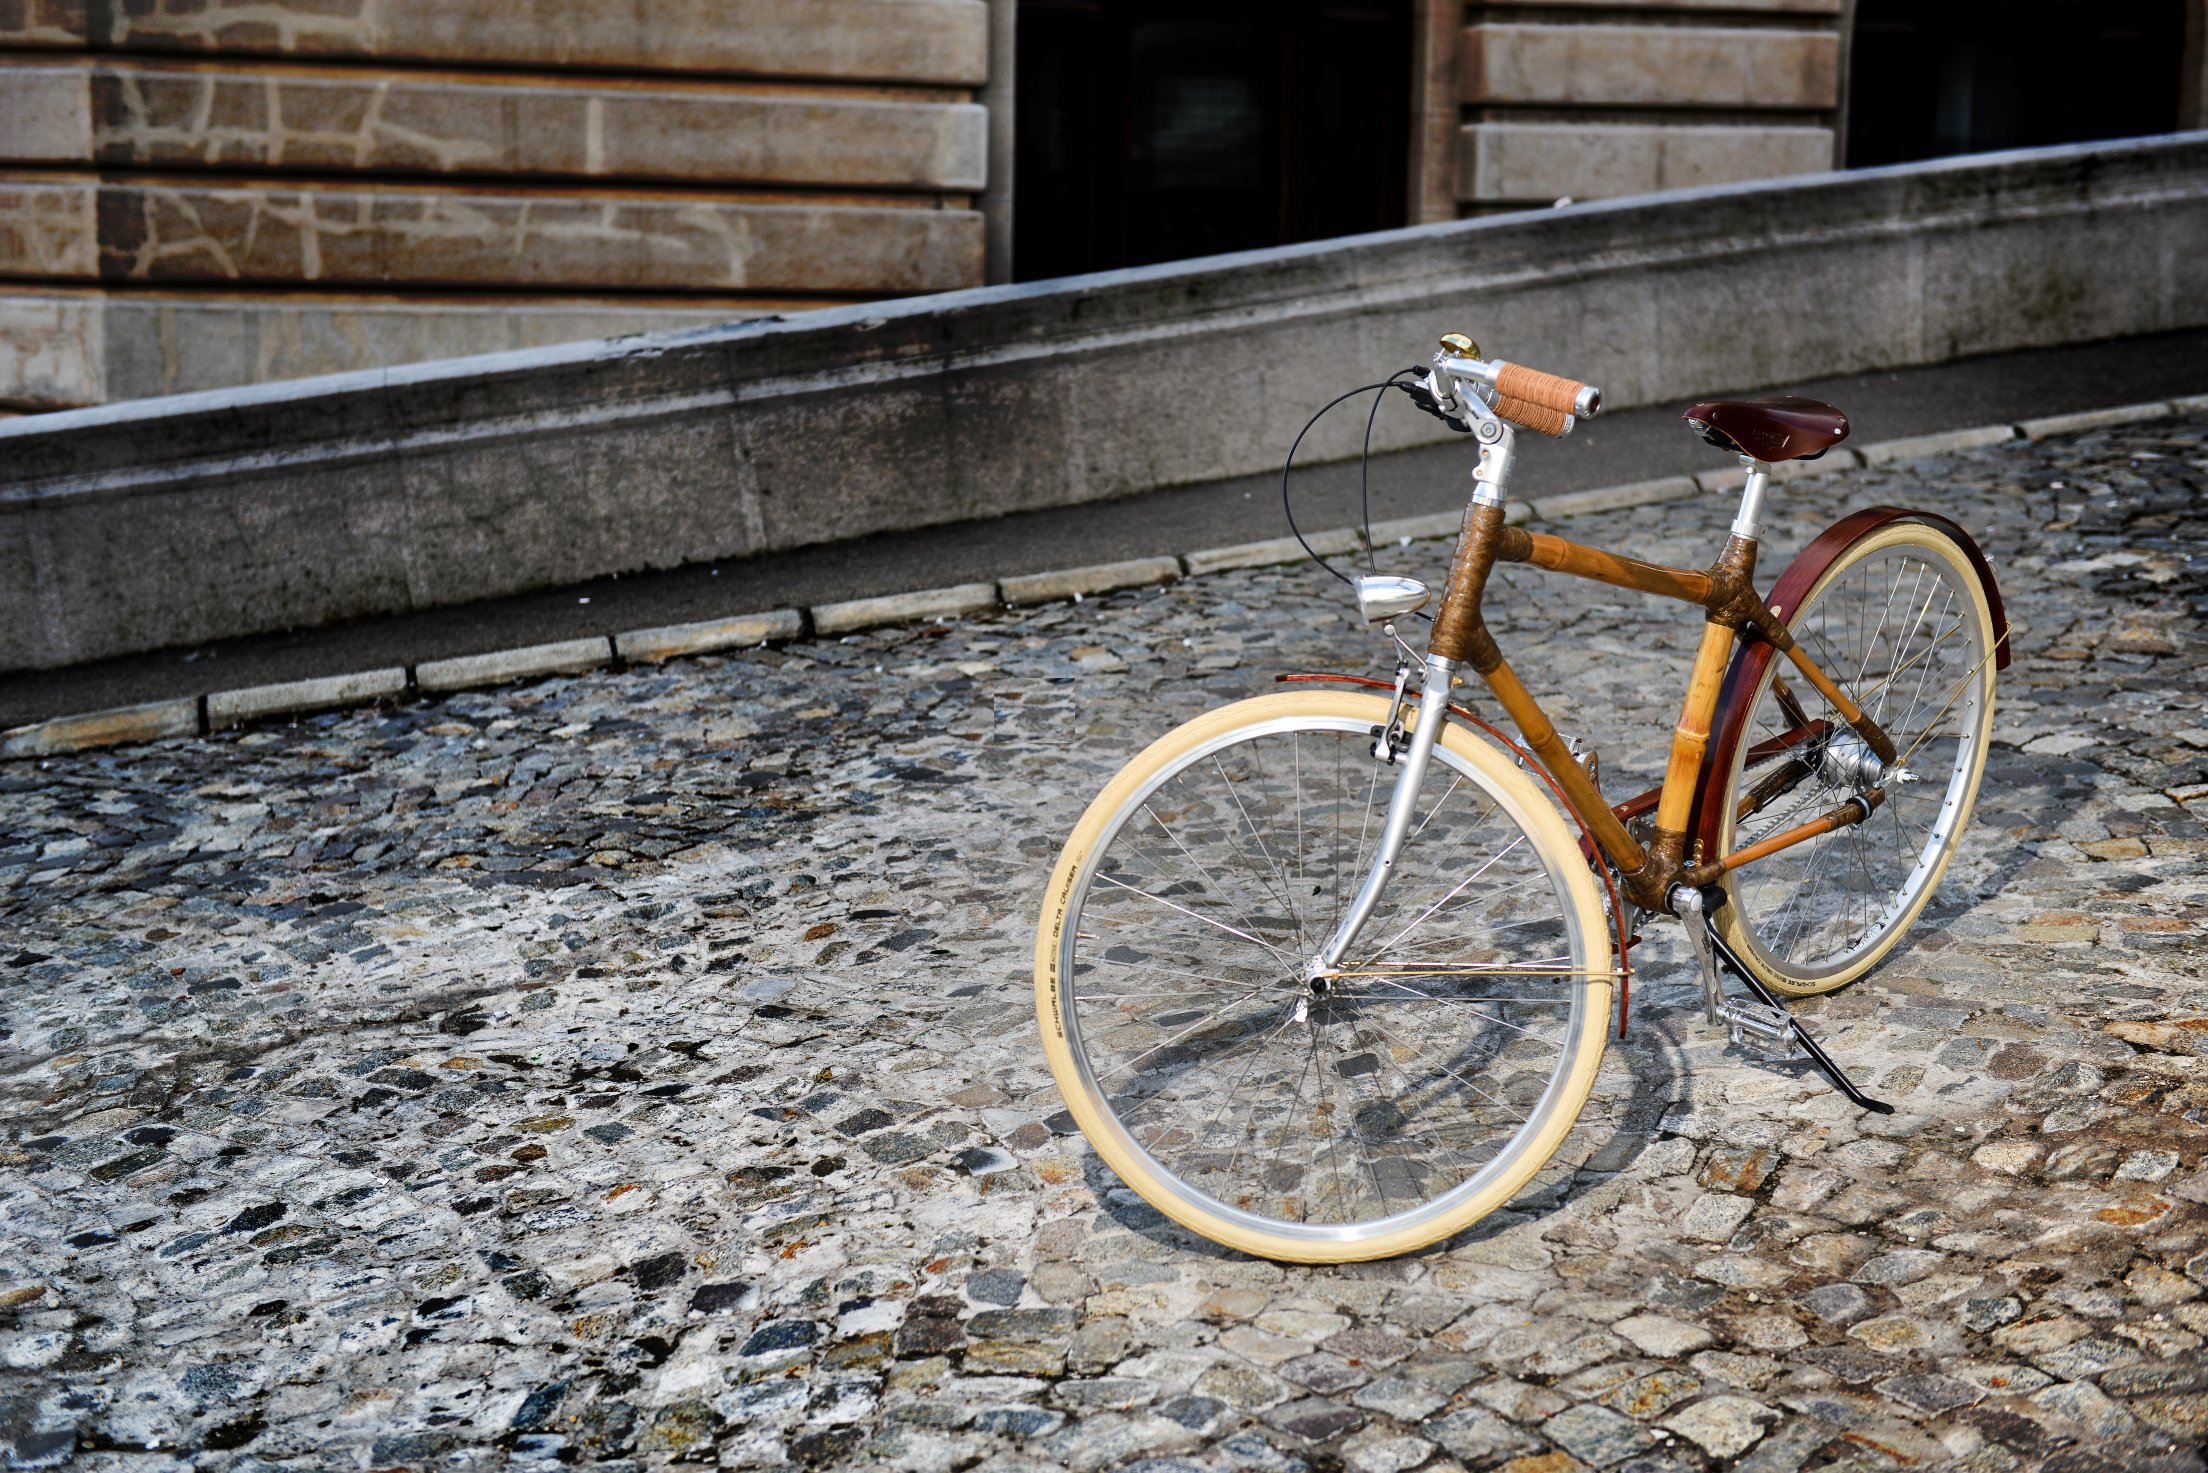 Craft Bicycle - The ideal bike for classy men.